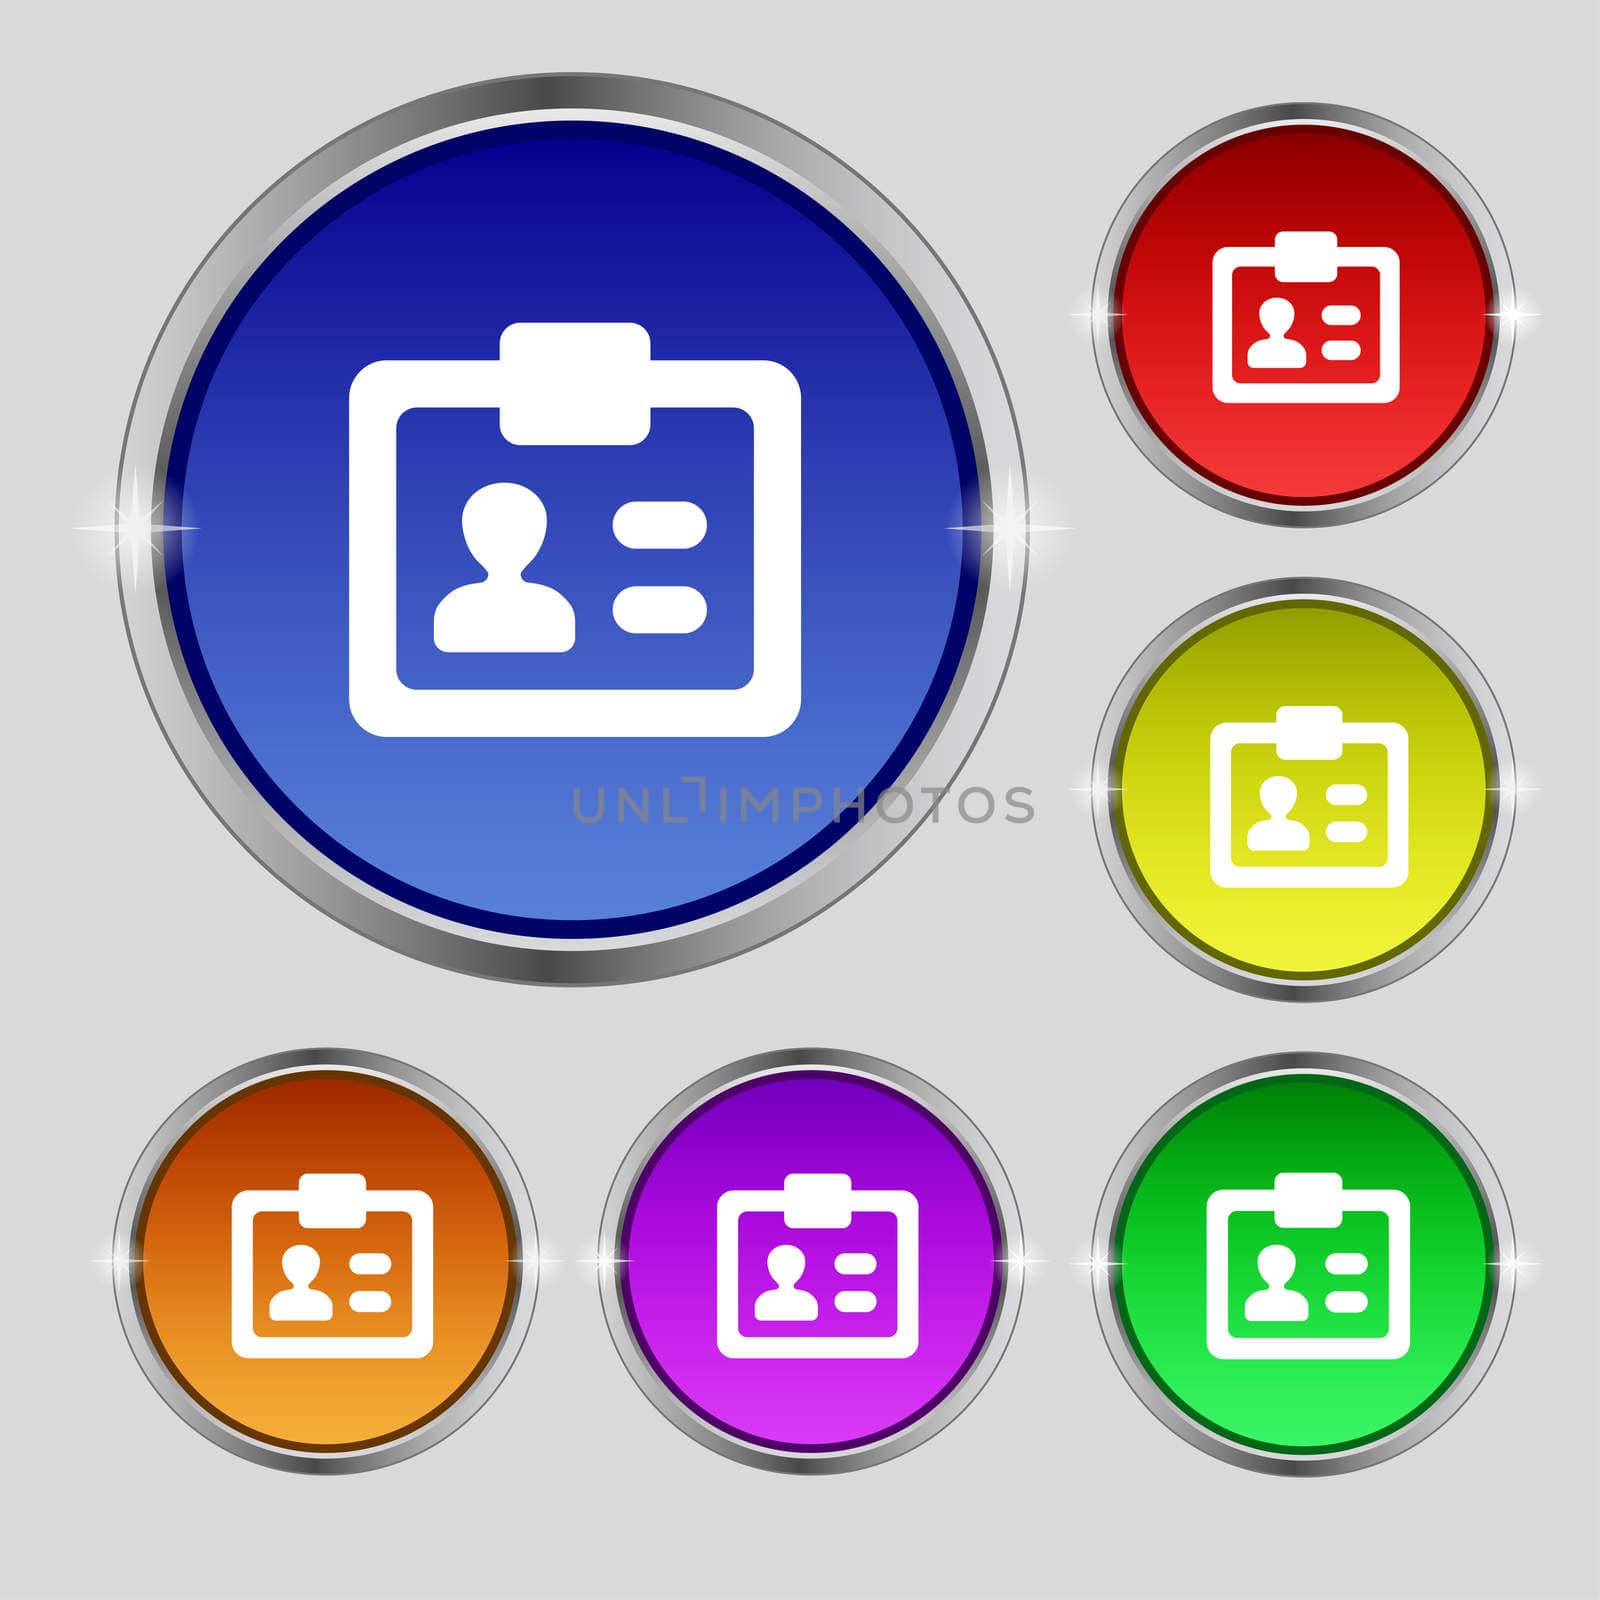 ID, Identity card icon sign. Round symbol on bright colourful buttons. illustration